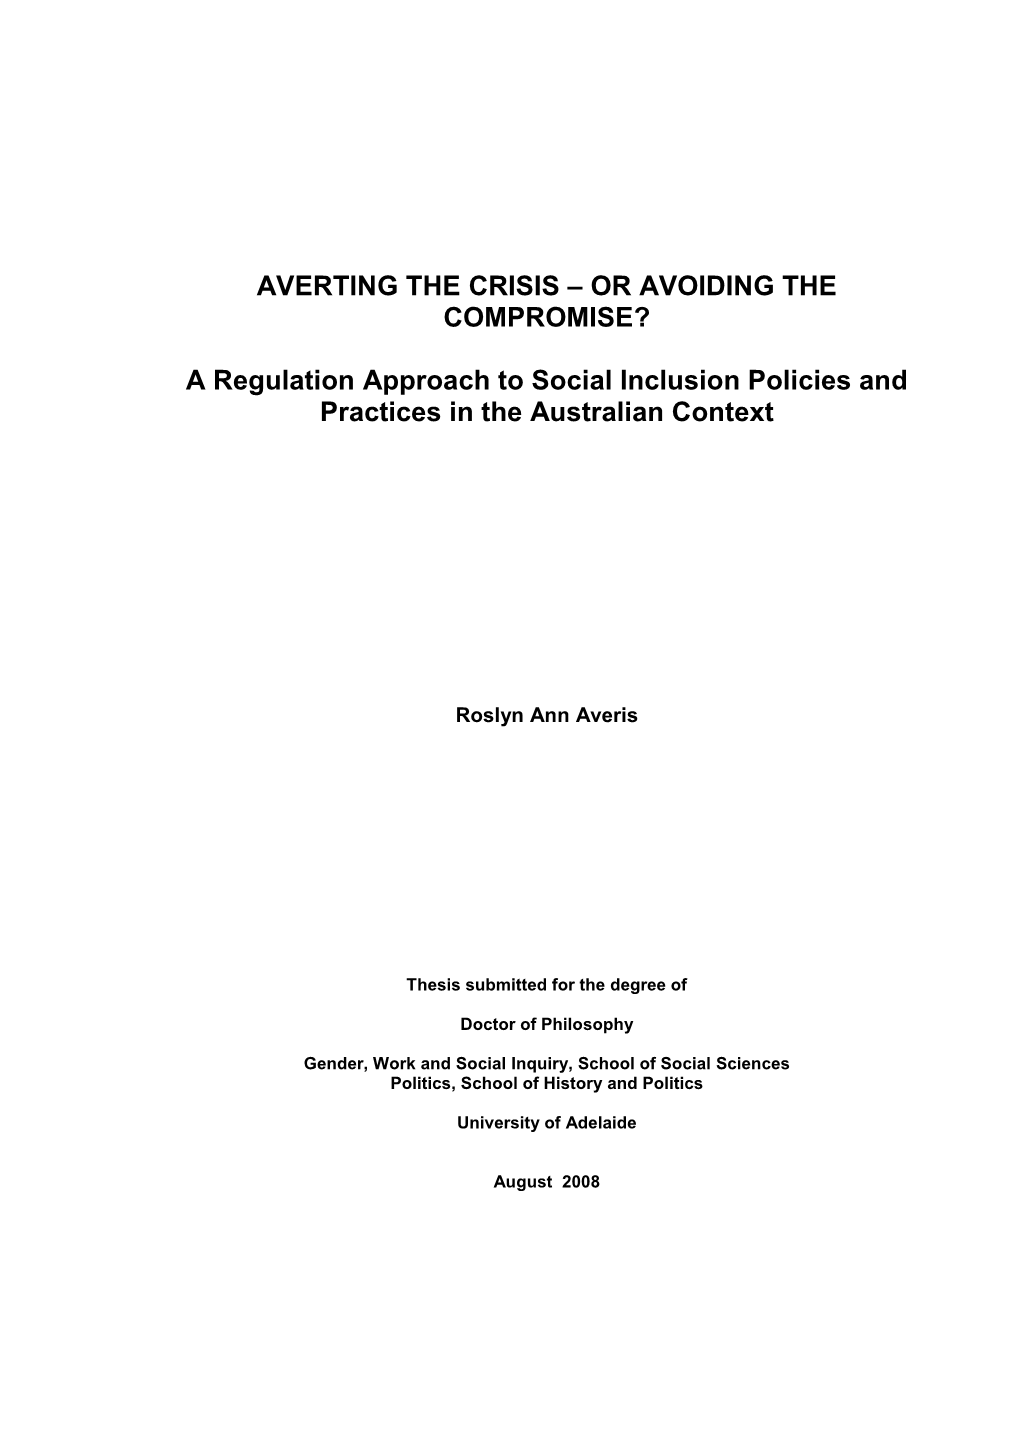 A Regulation Approach to Social Inclusion Policies and Practices in the Australian Context